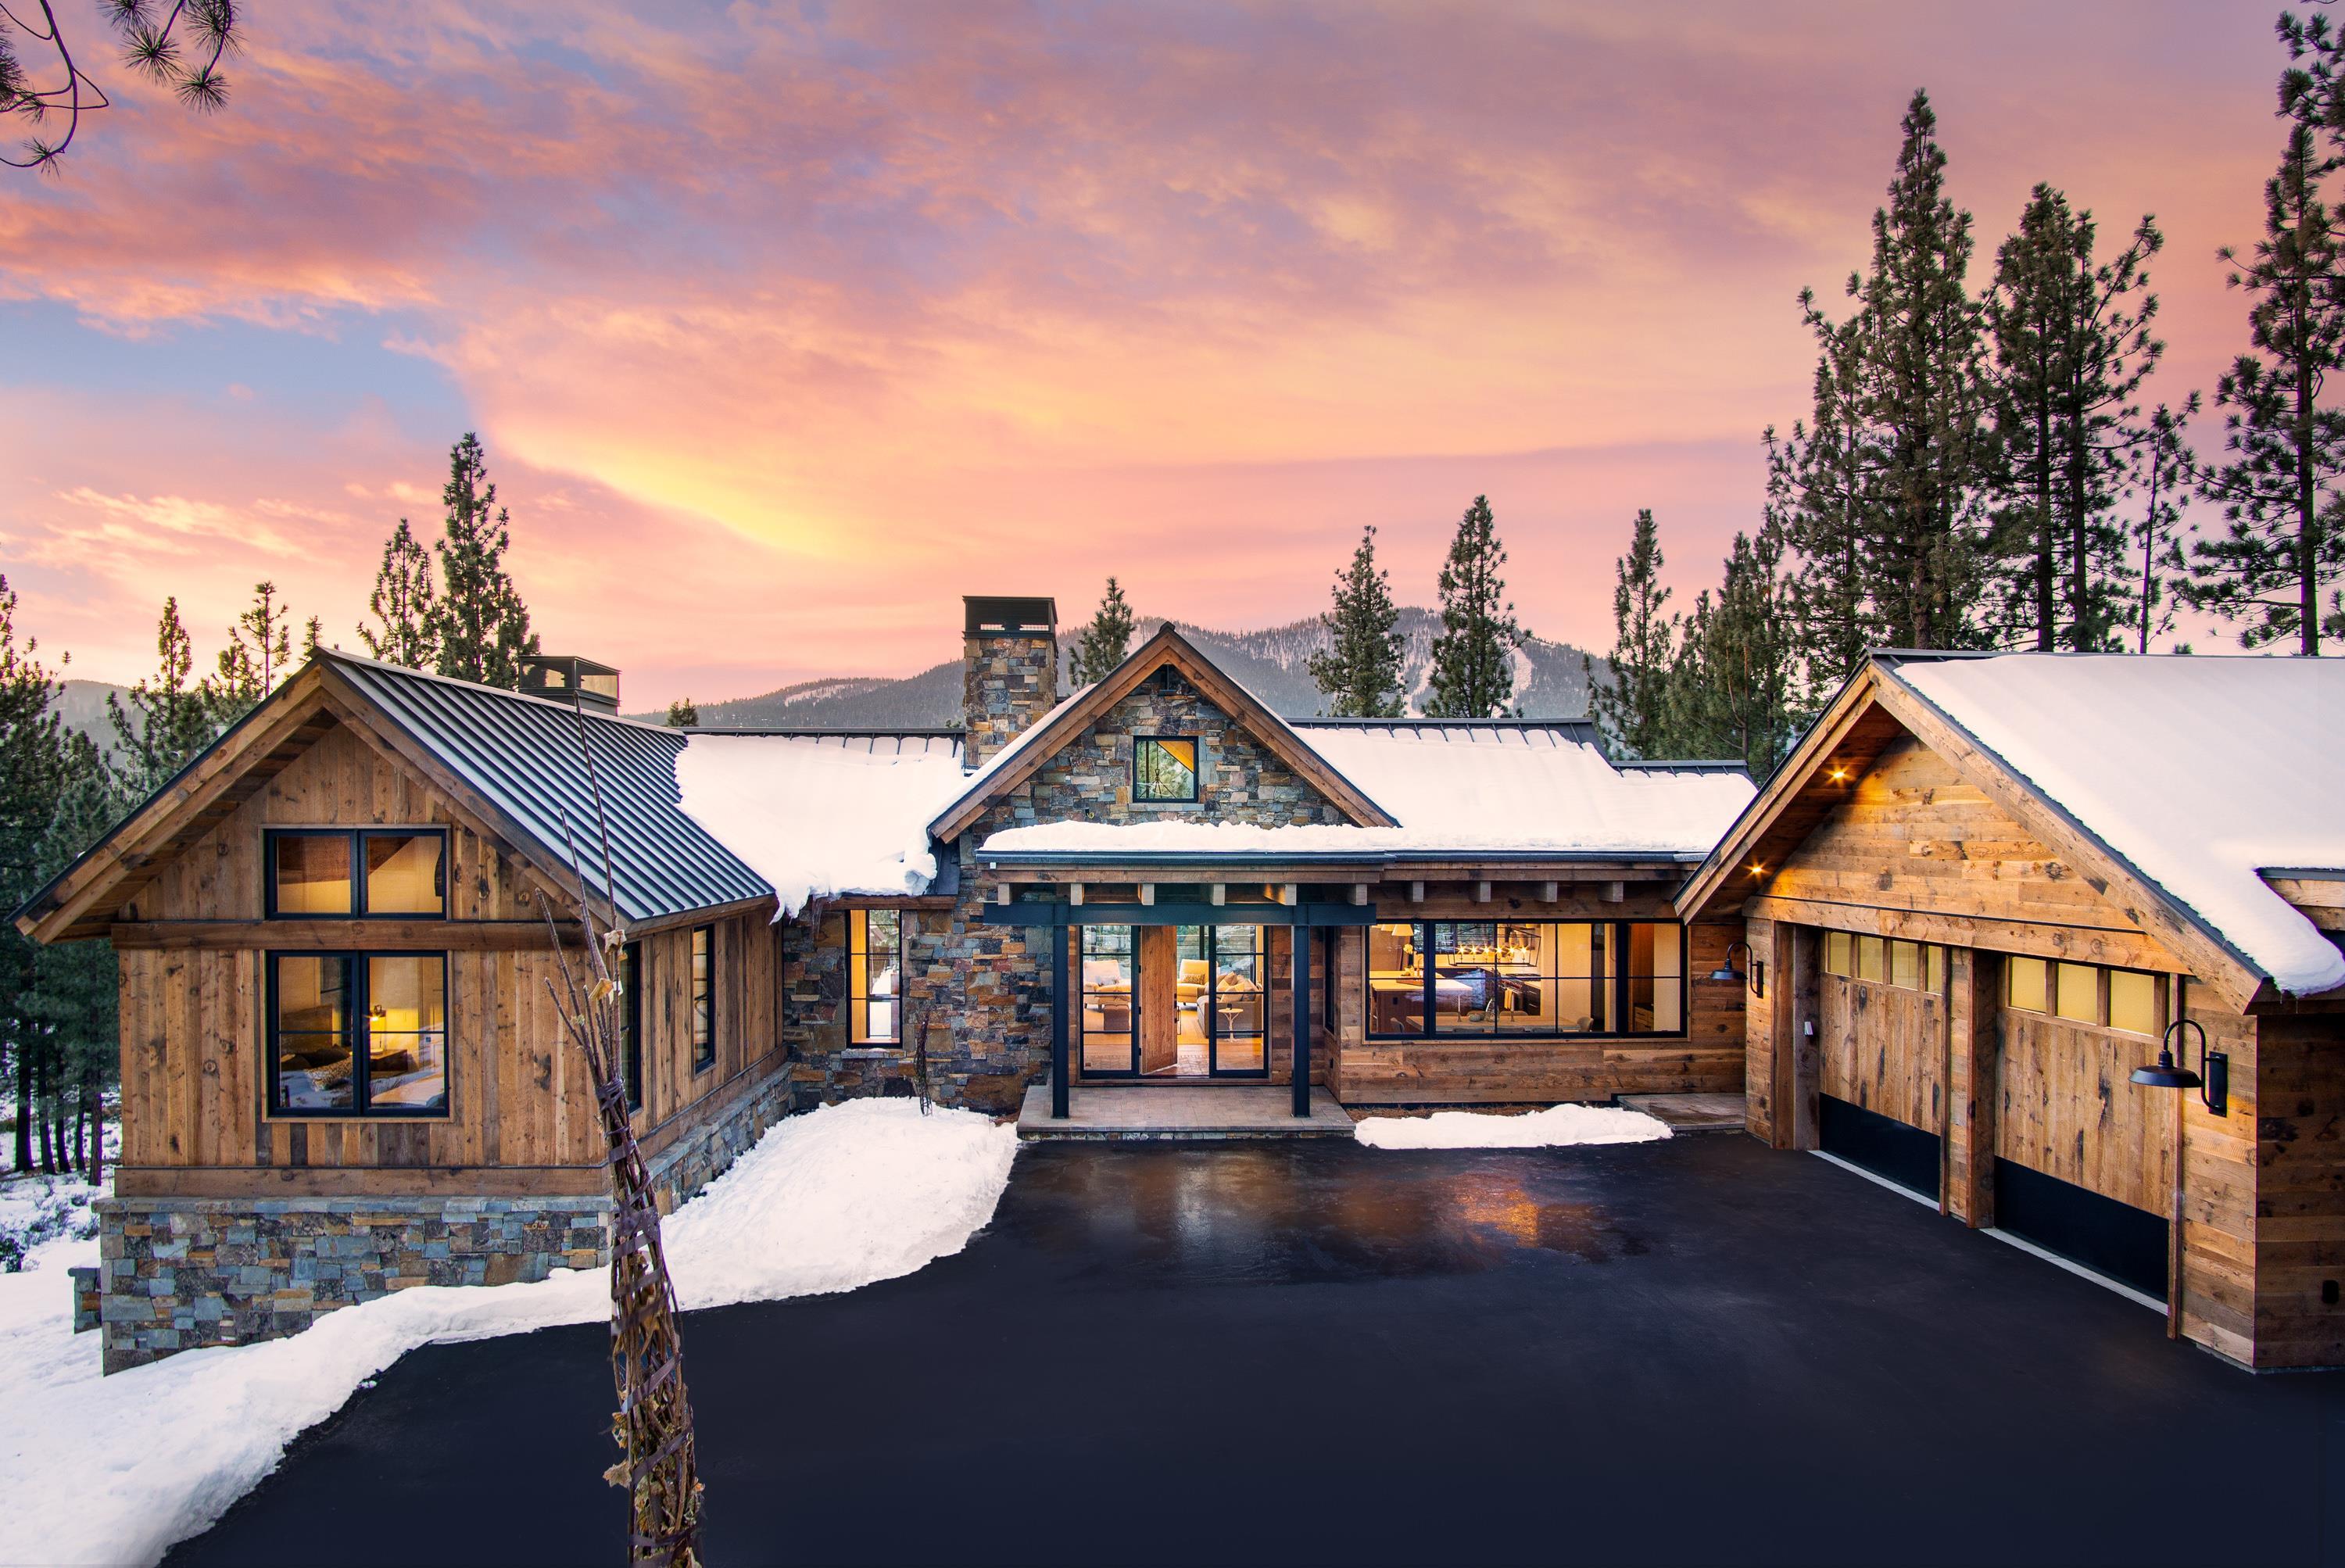 Image for 270 Laura Knight, Truckee, CA 96161